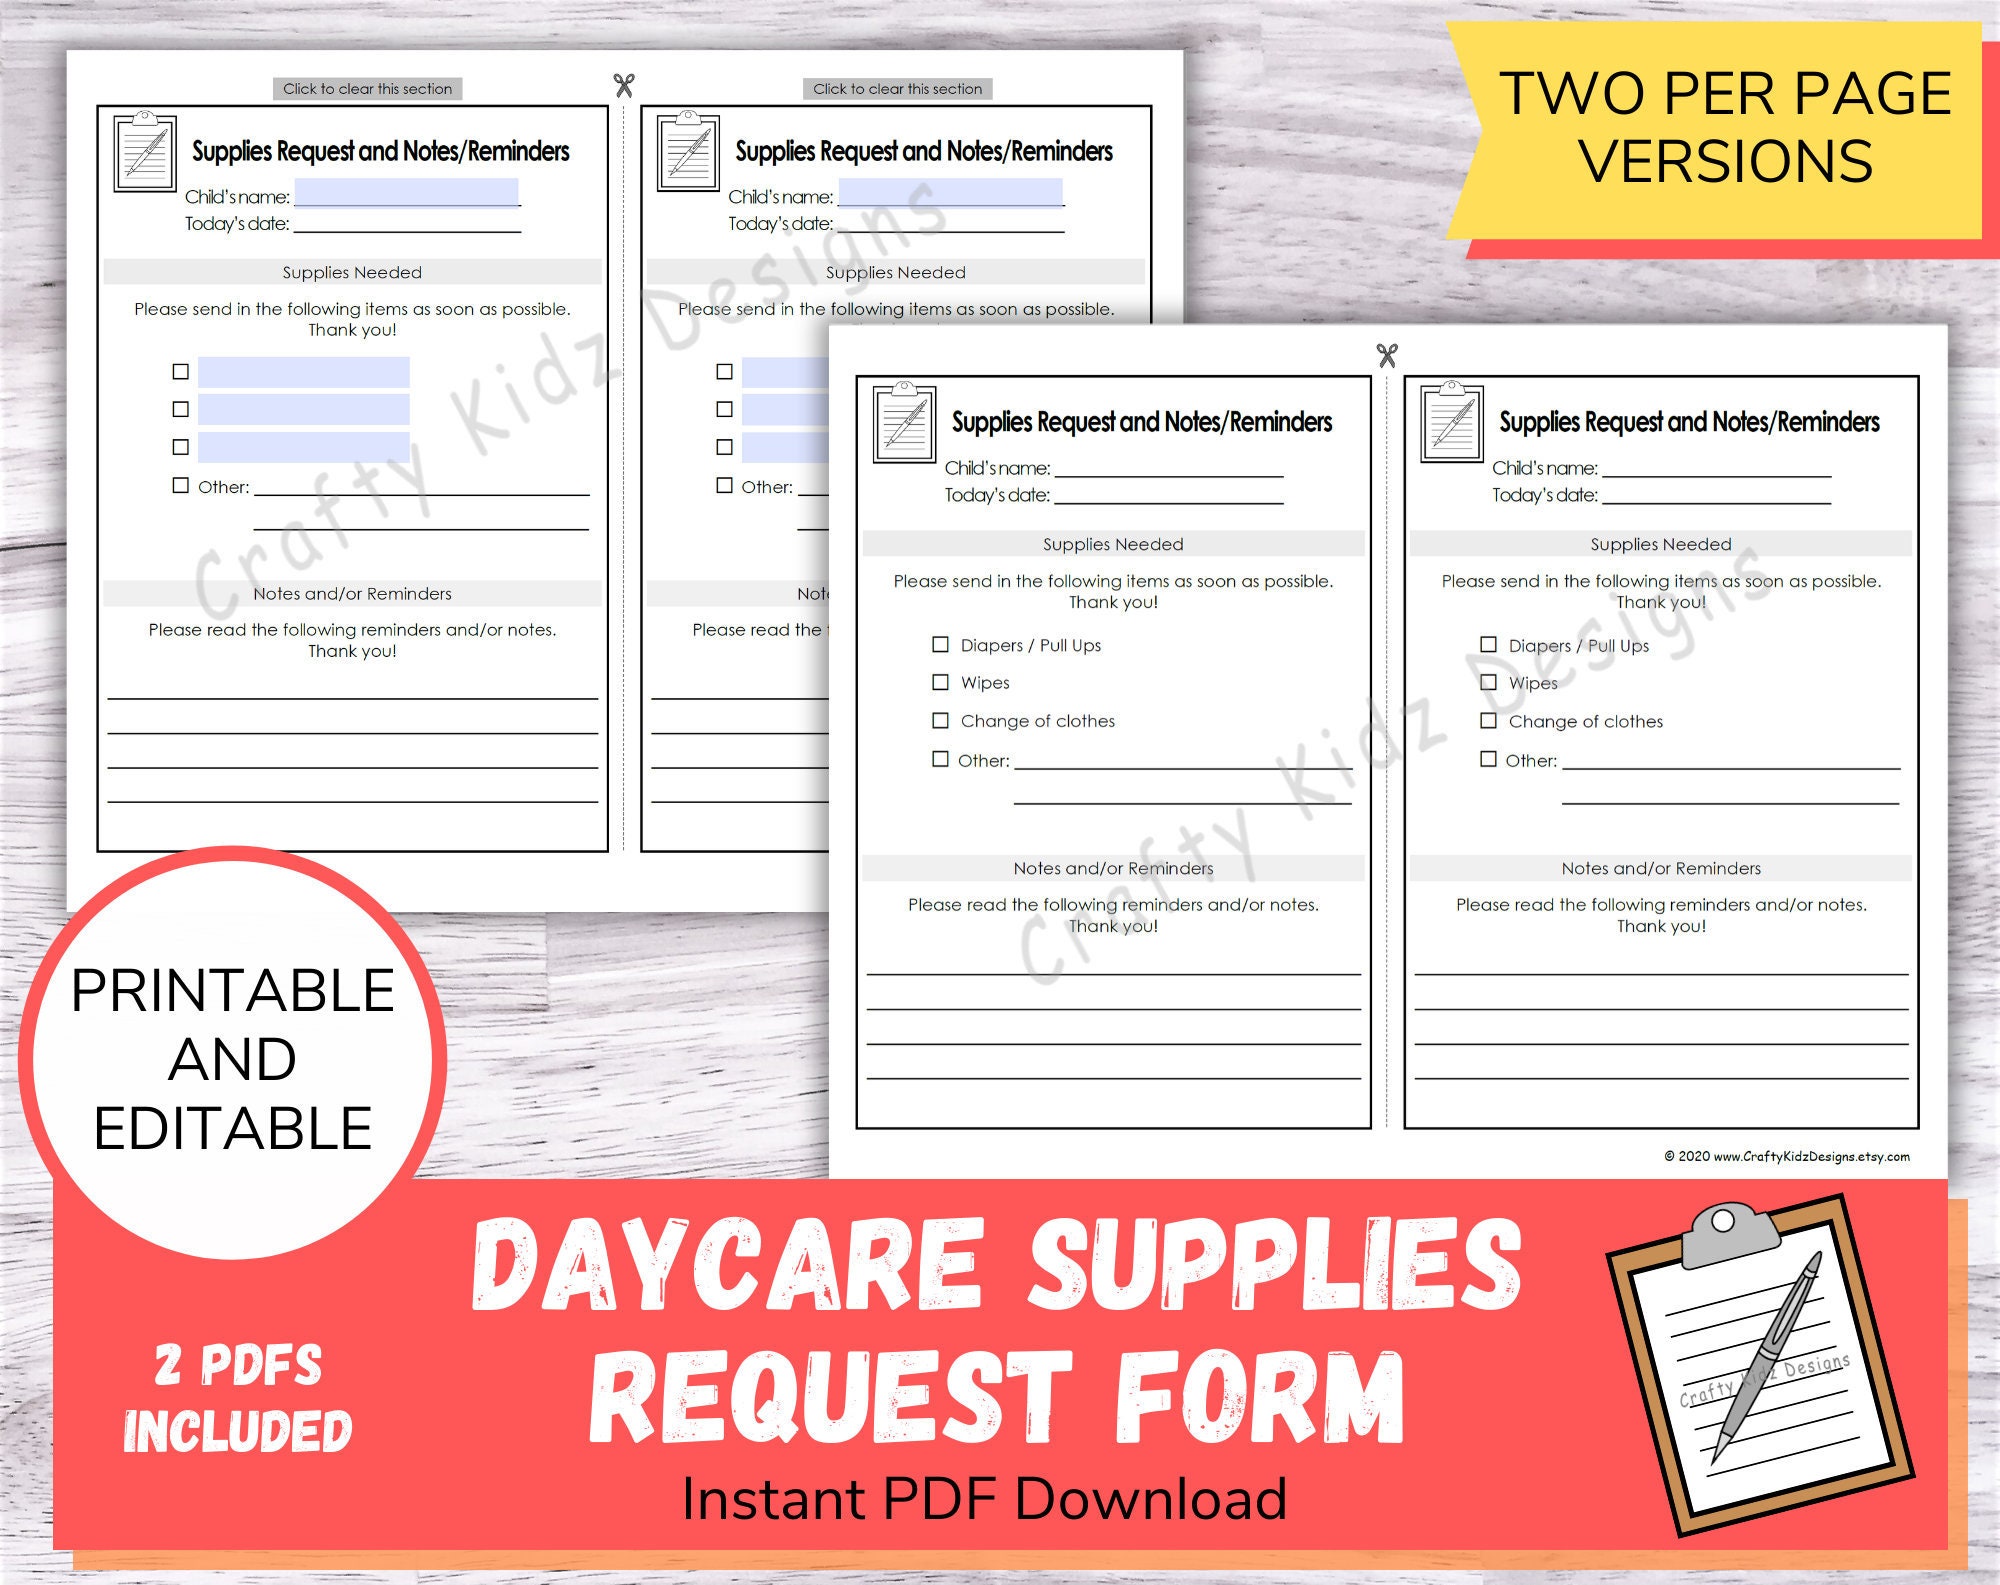 Daycare Supplies Request Form for Home Daycares, Childcare Centers and  Preschools, Printable and Editable PDF Daycare Forms 